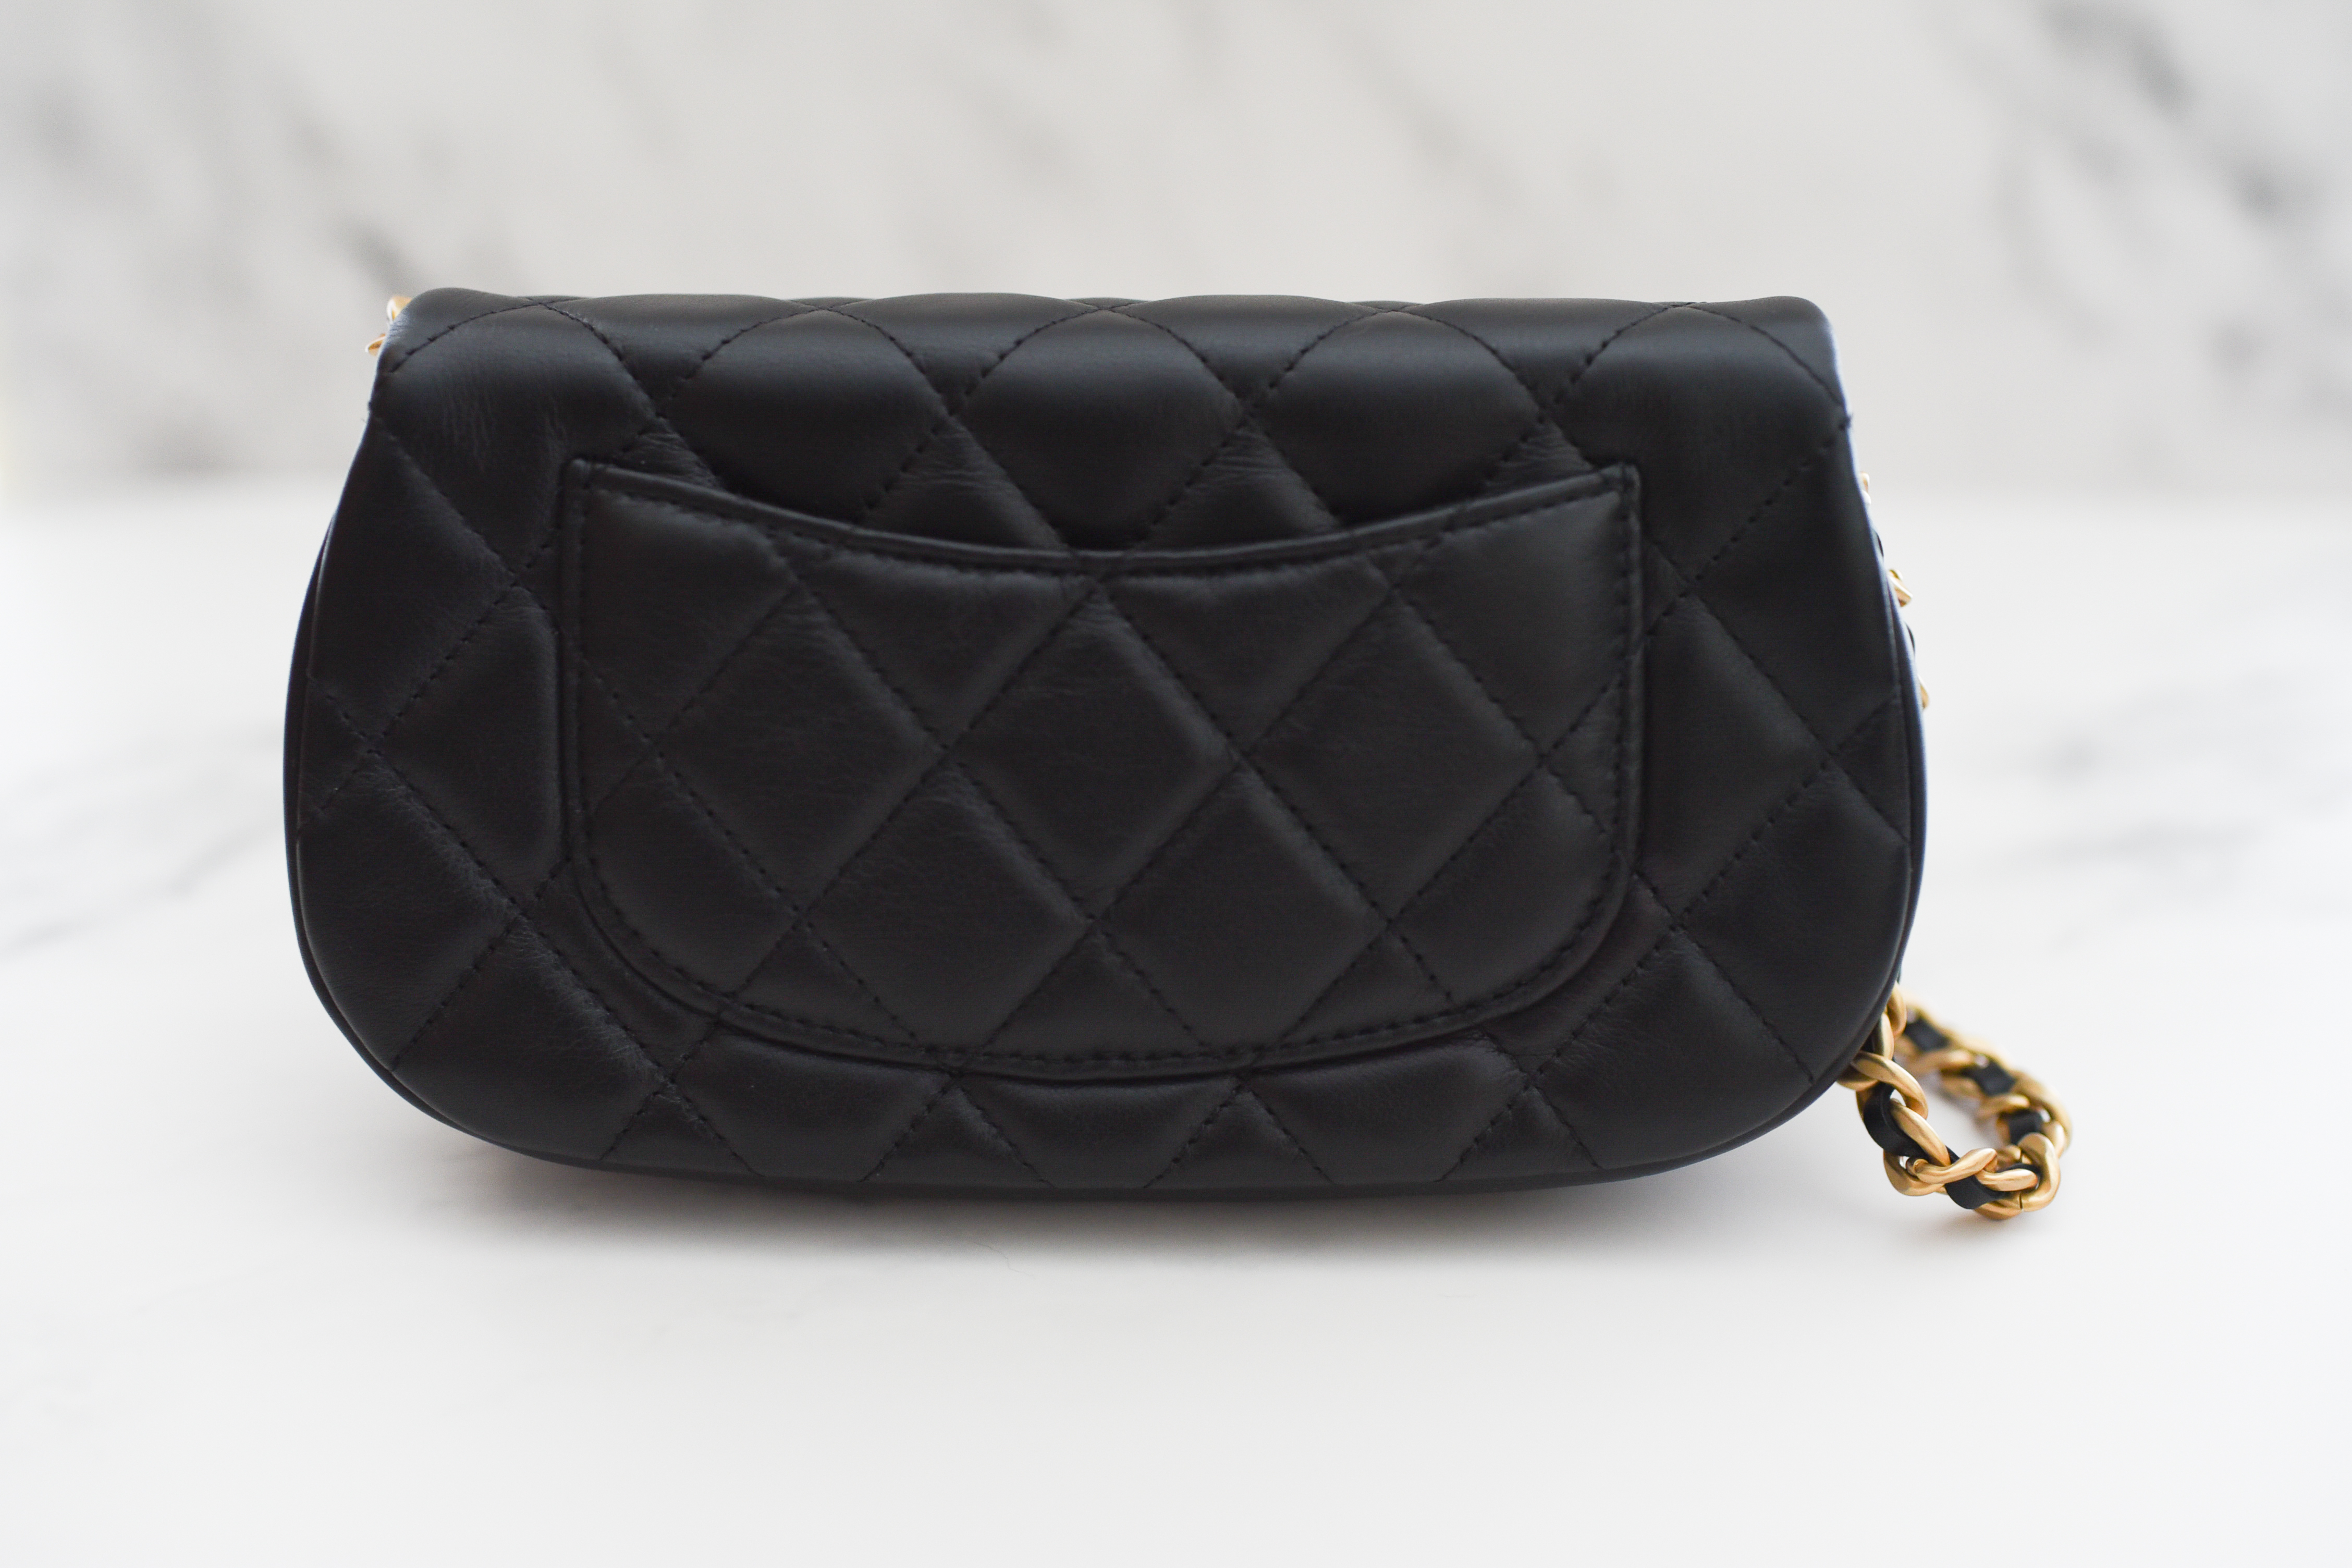 Chanel Seasonal Quilted Coco Mail Clutch with Chain, Black Calfskin Leather  with Gold Hardware, New in Box - Julia Rose Boston